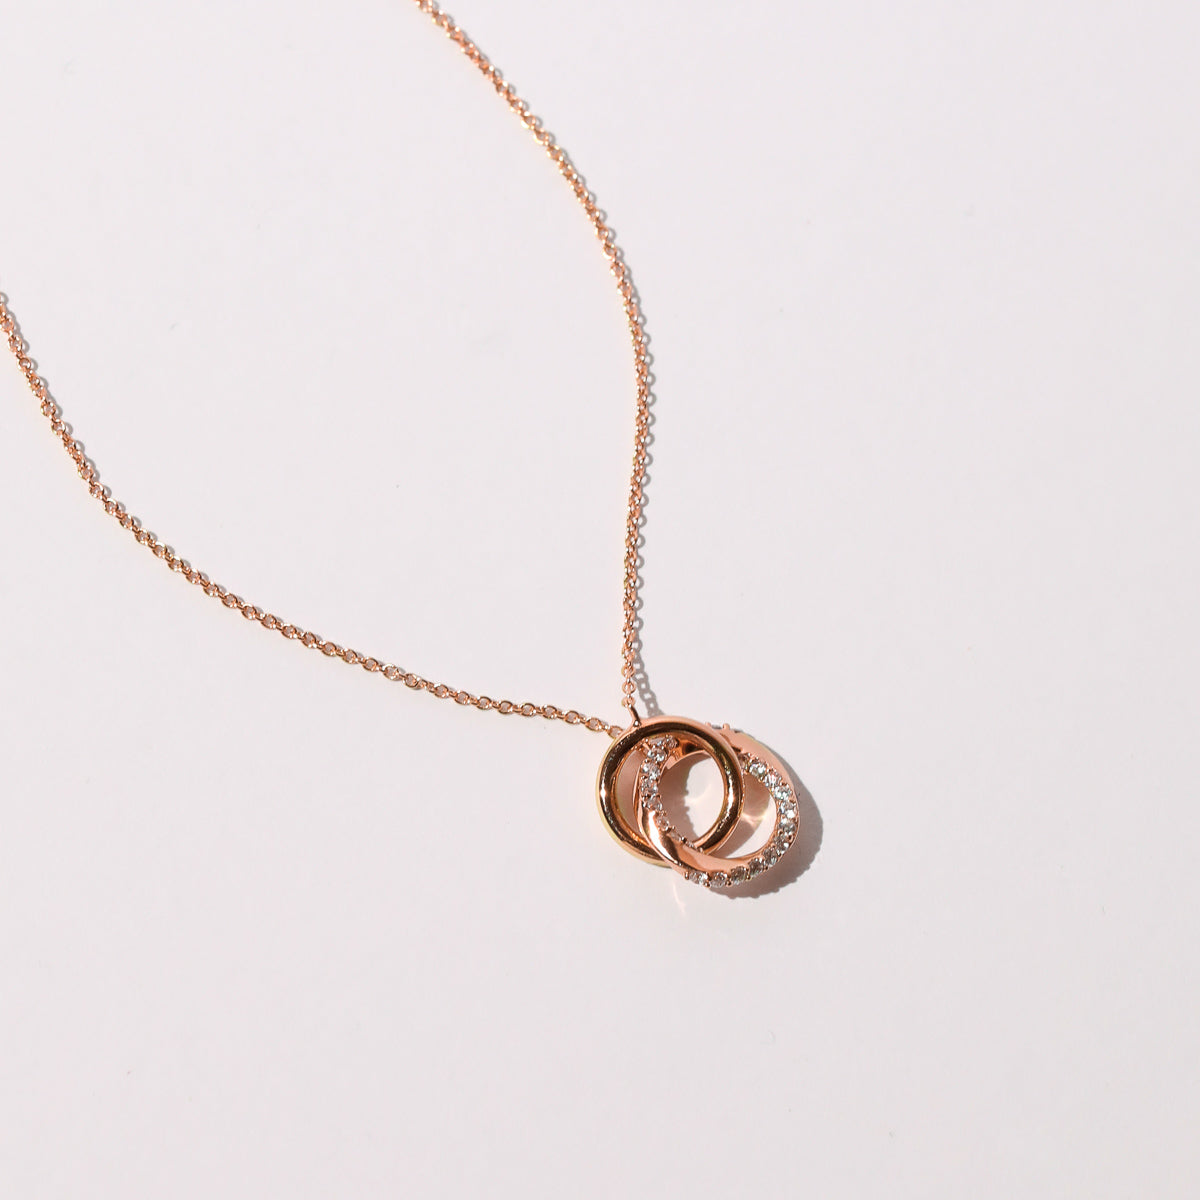 Double Chain Necklace - Rose Gold